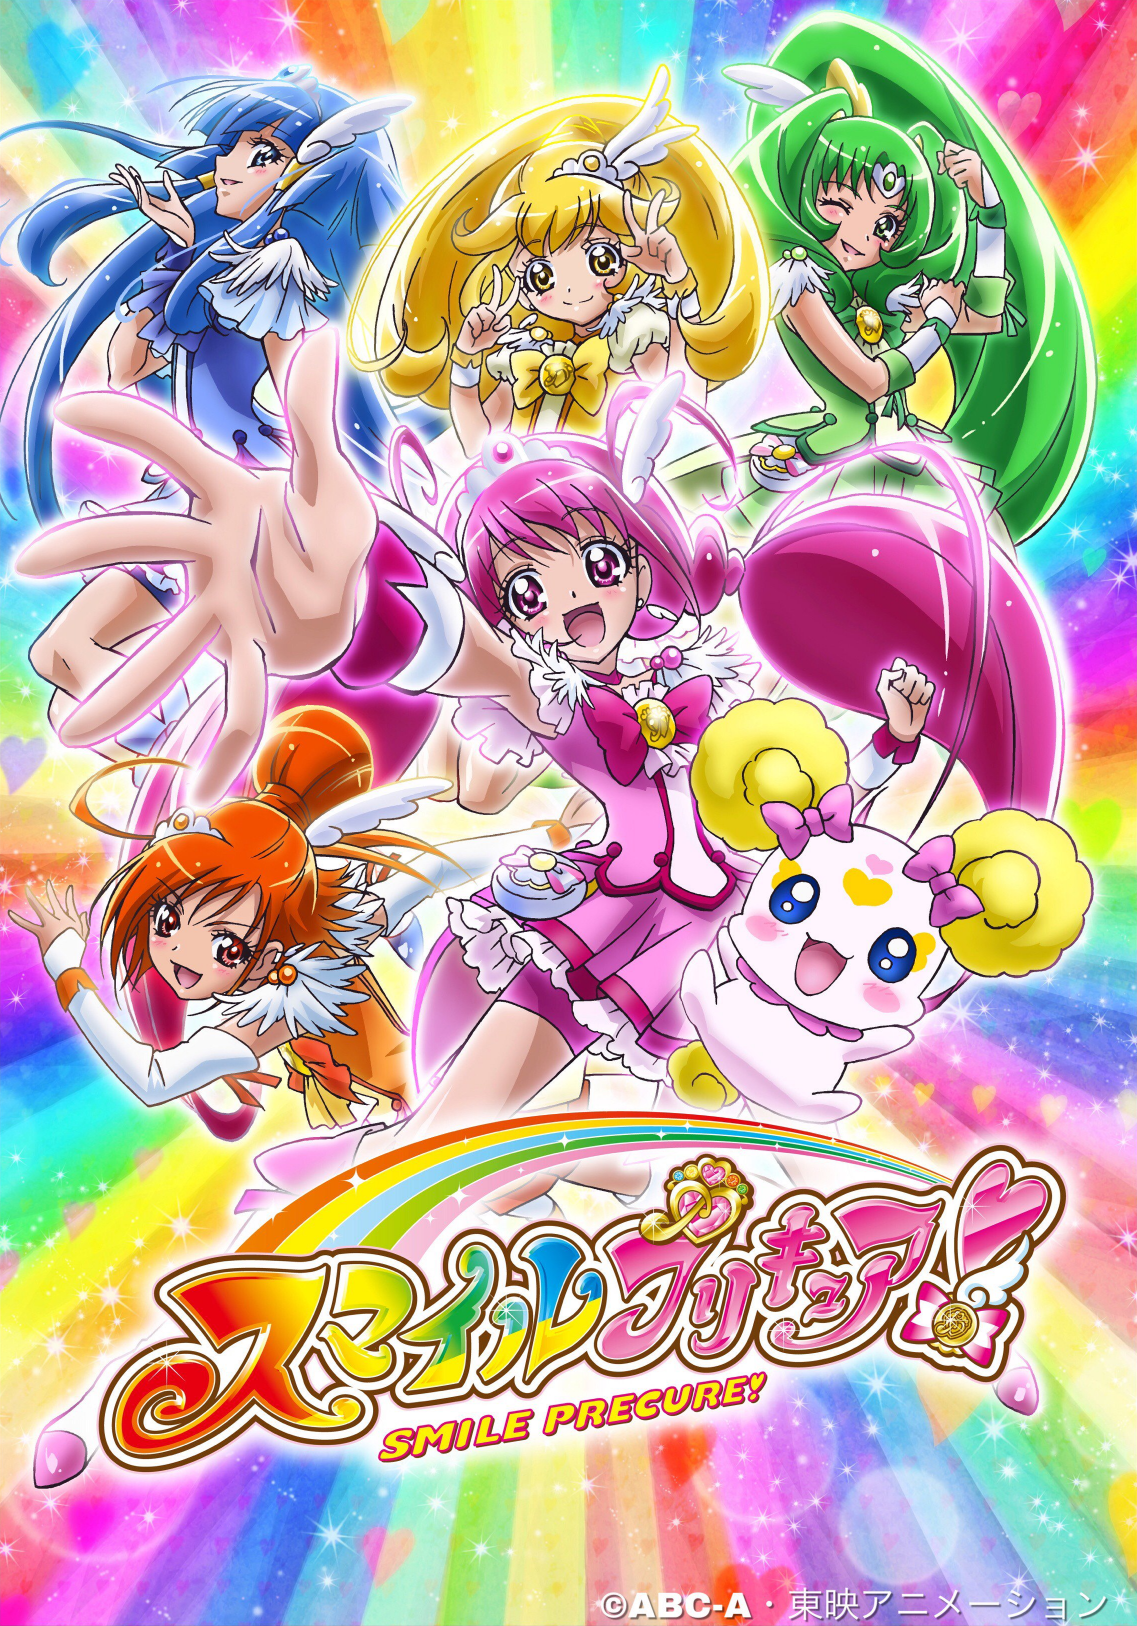 What I think what will be in wonderful precure! - Comic Studio